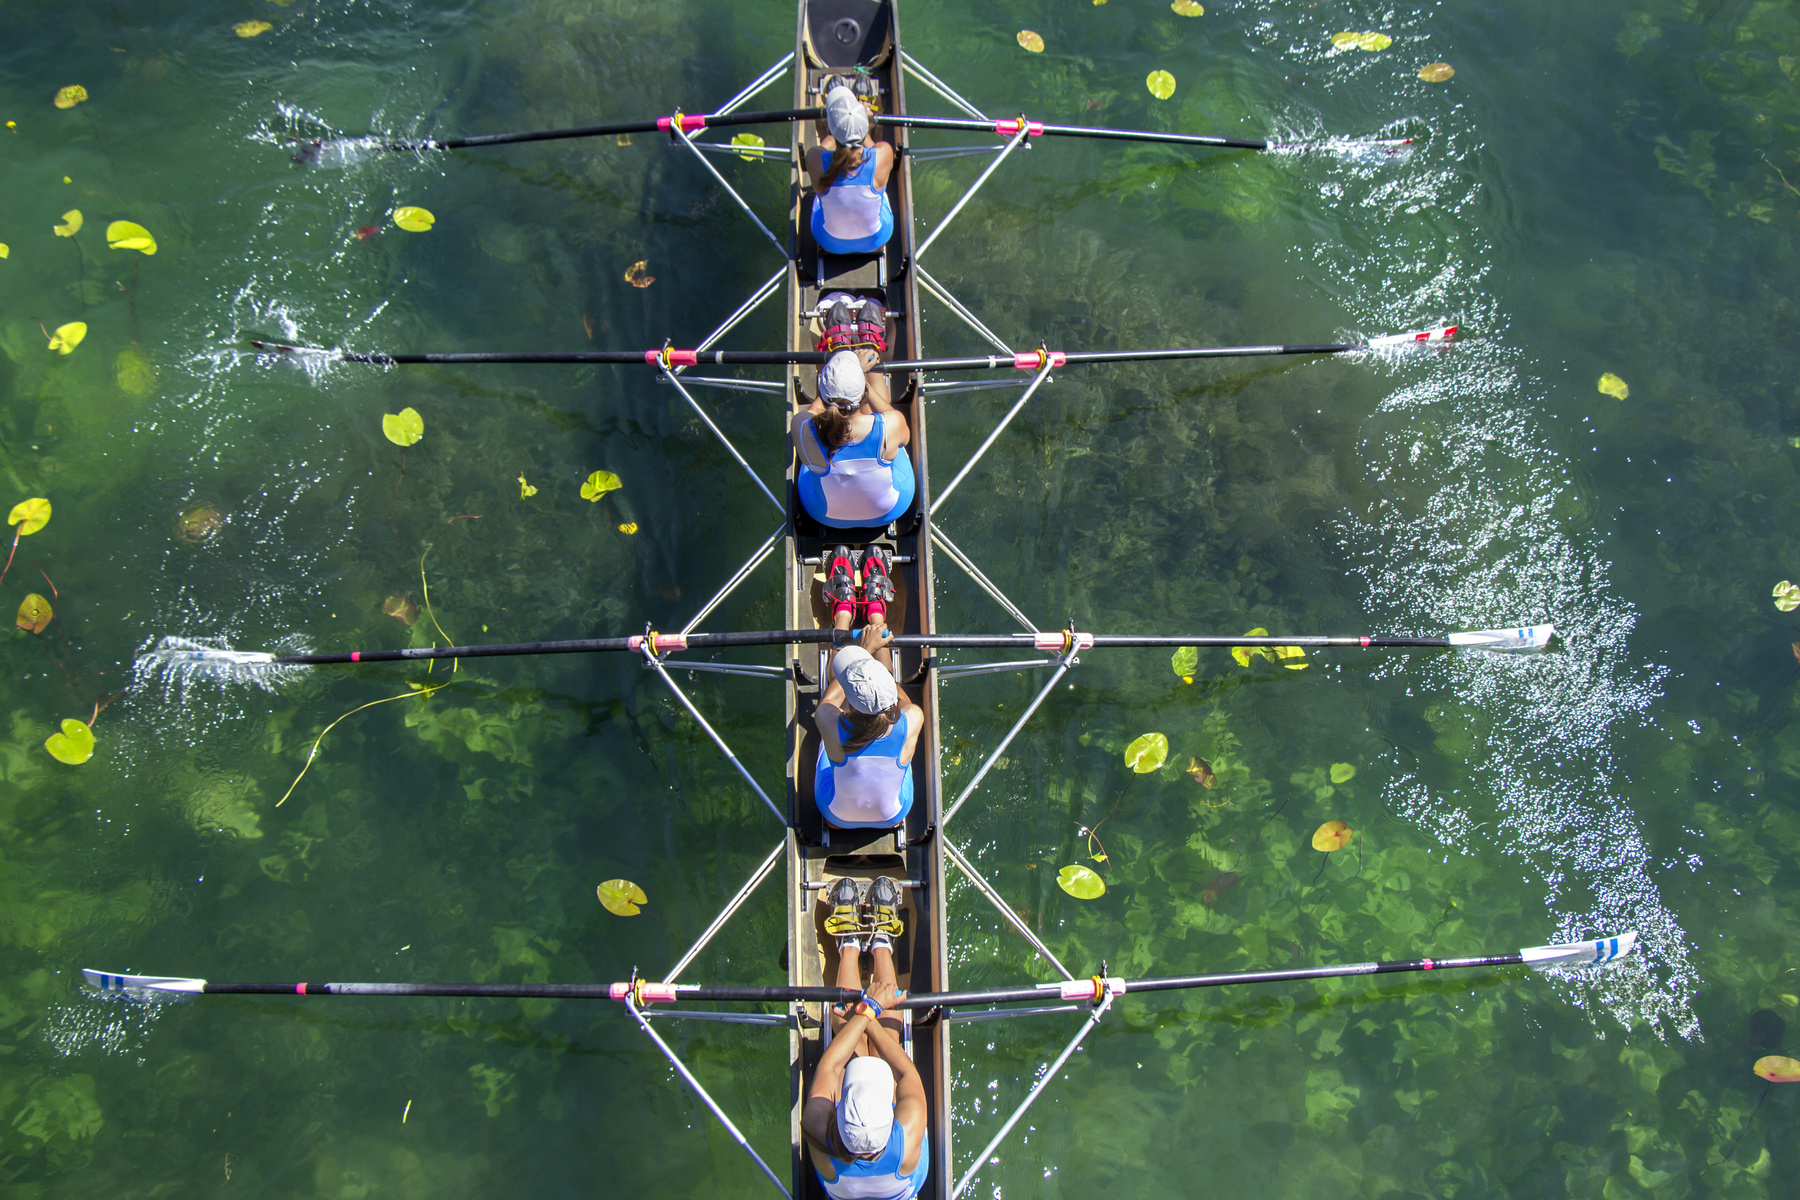  Rowing Team in Race on the Lake